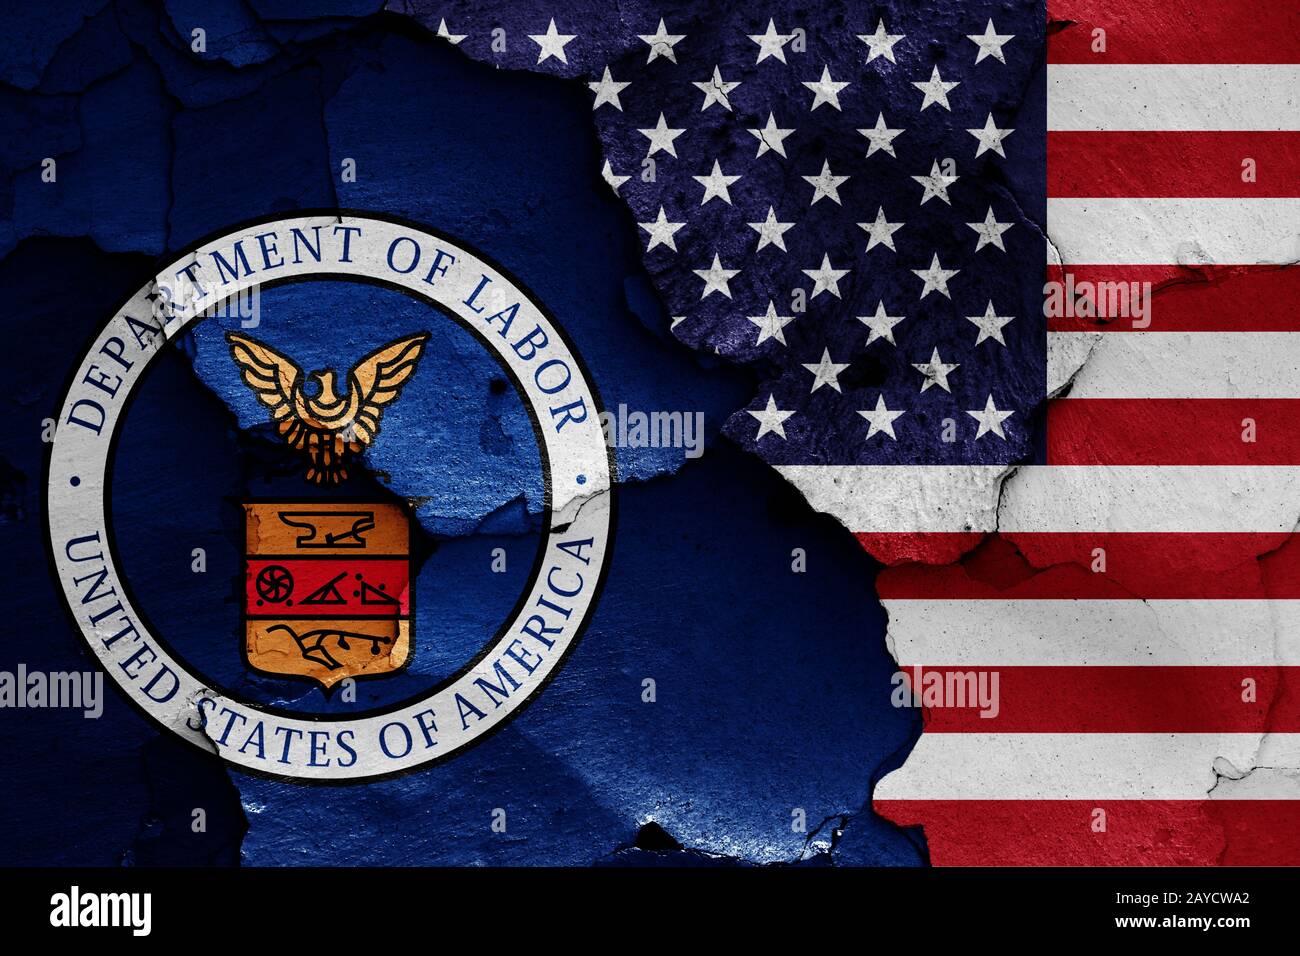 flags-of-department-of-labor-and-usa-painted-on-cracked-wall-stock-photo-alamy